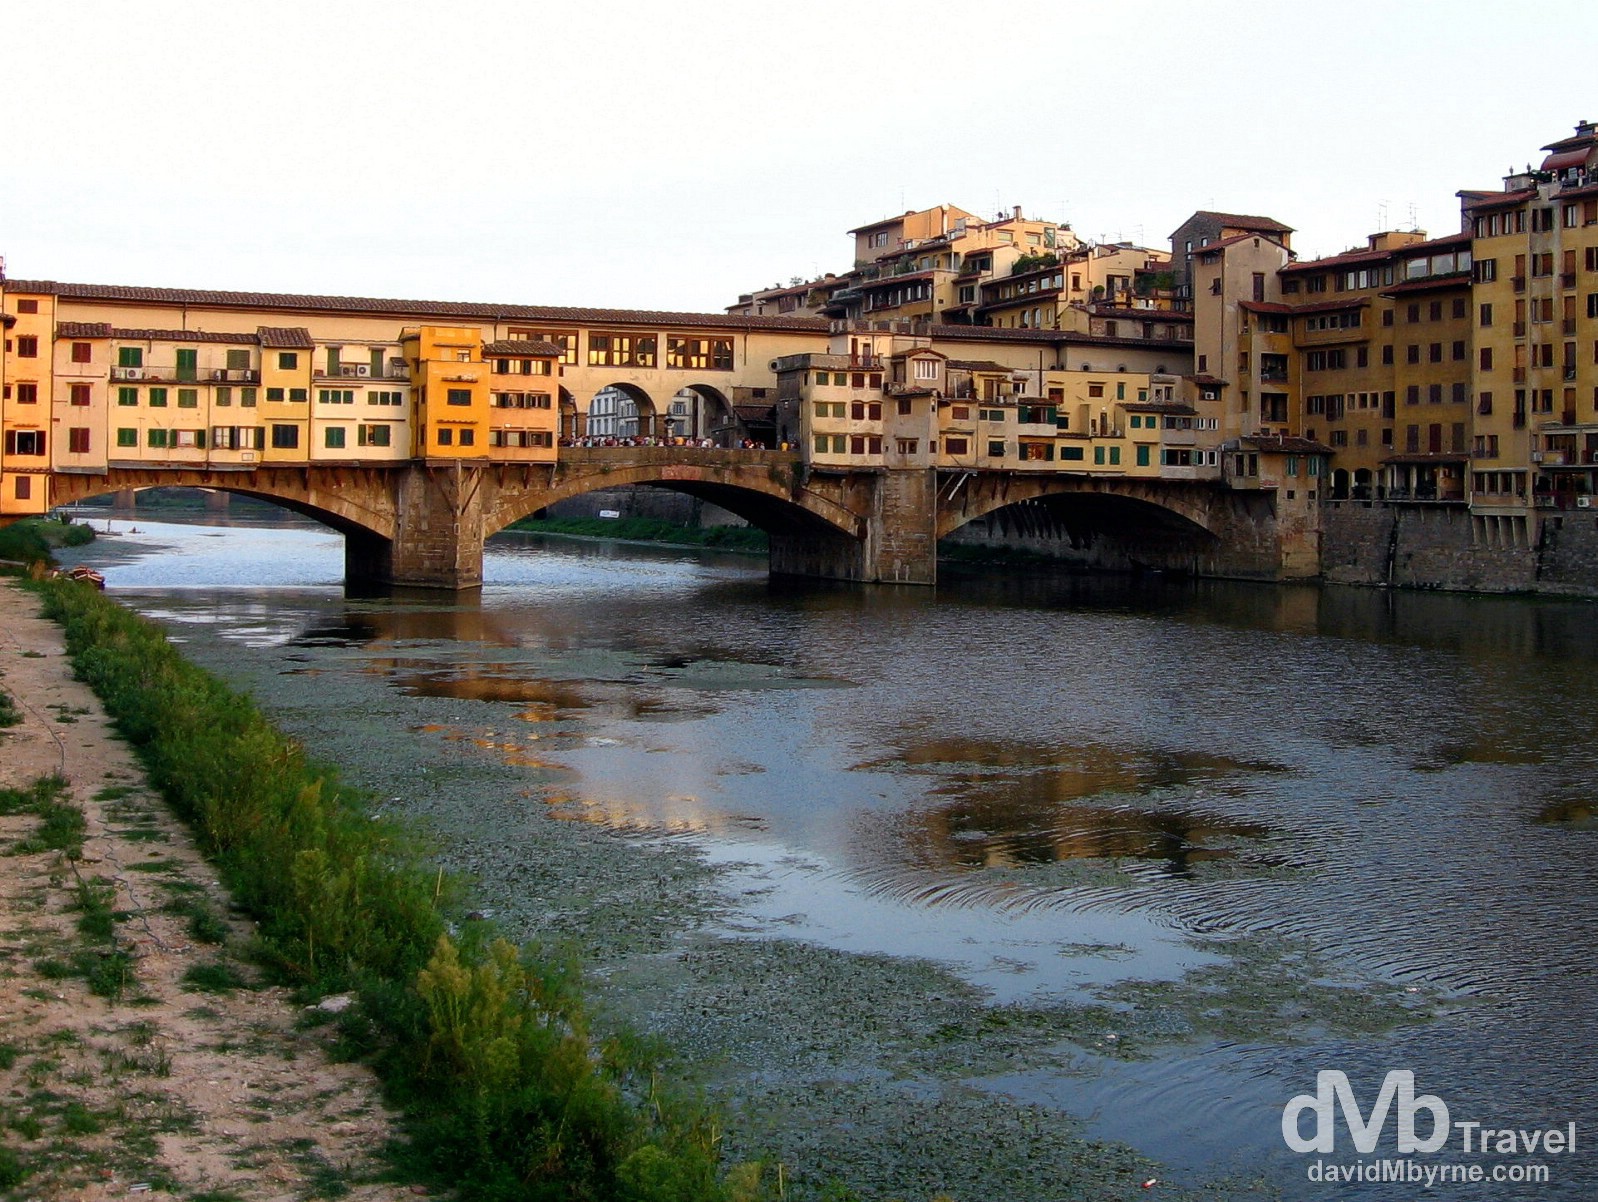 The Ponte Vecchio bridge over the Arno River in Florence, Tuscany, Italy. August 28th, 2007.